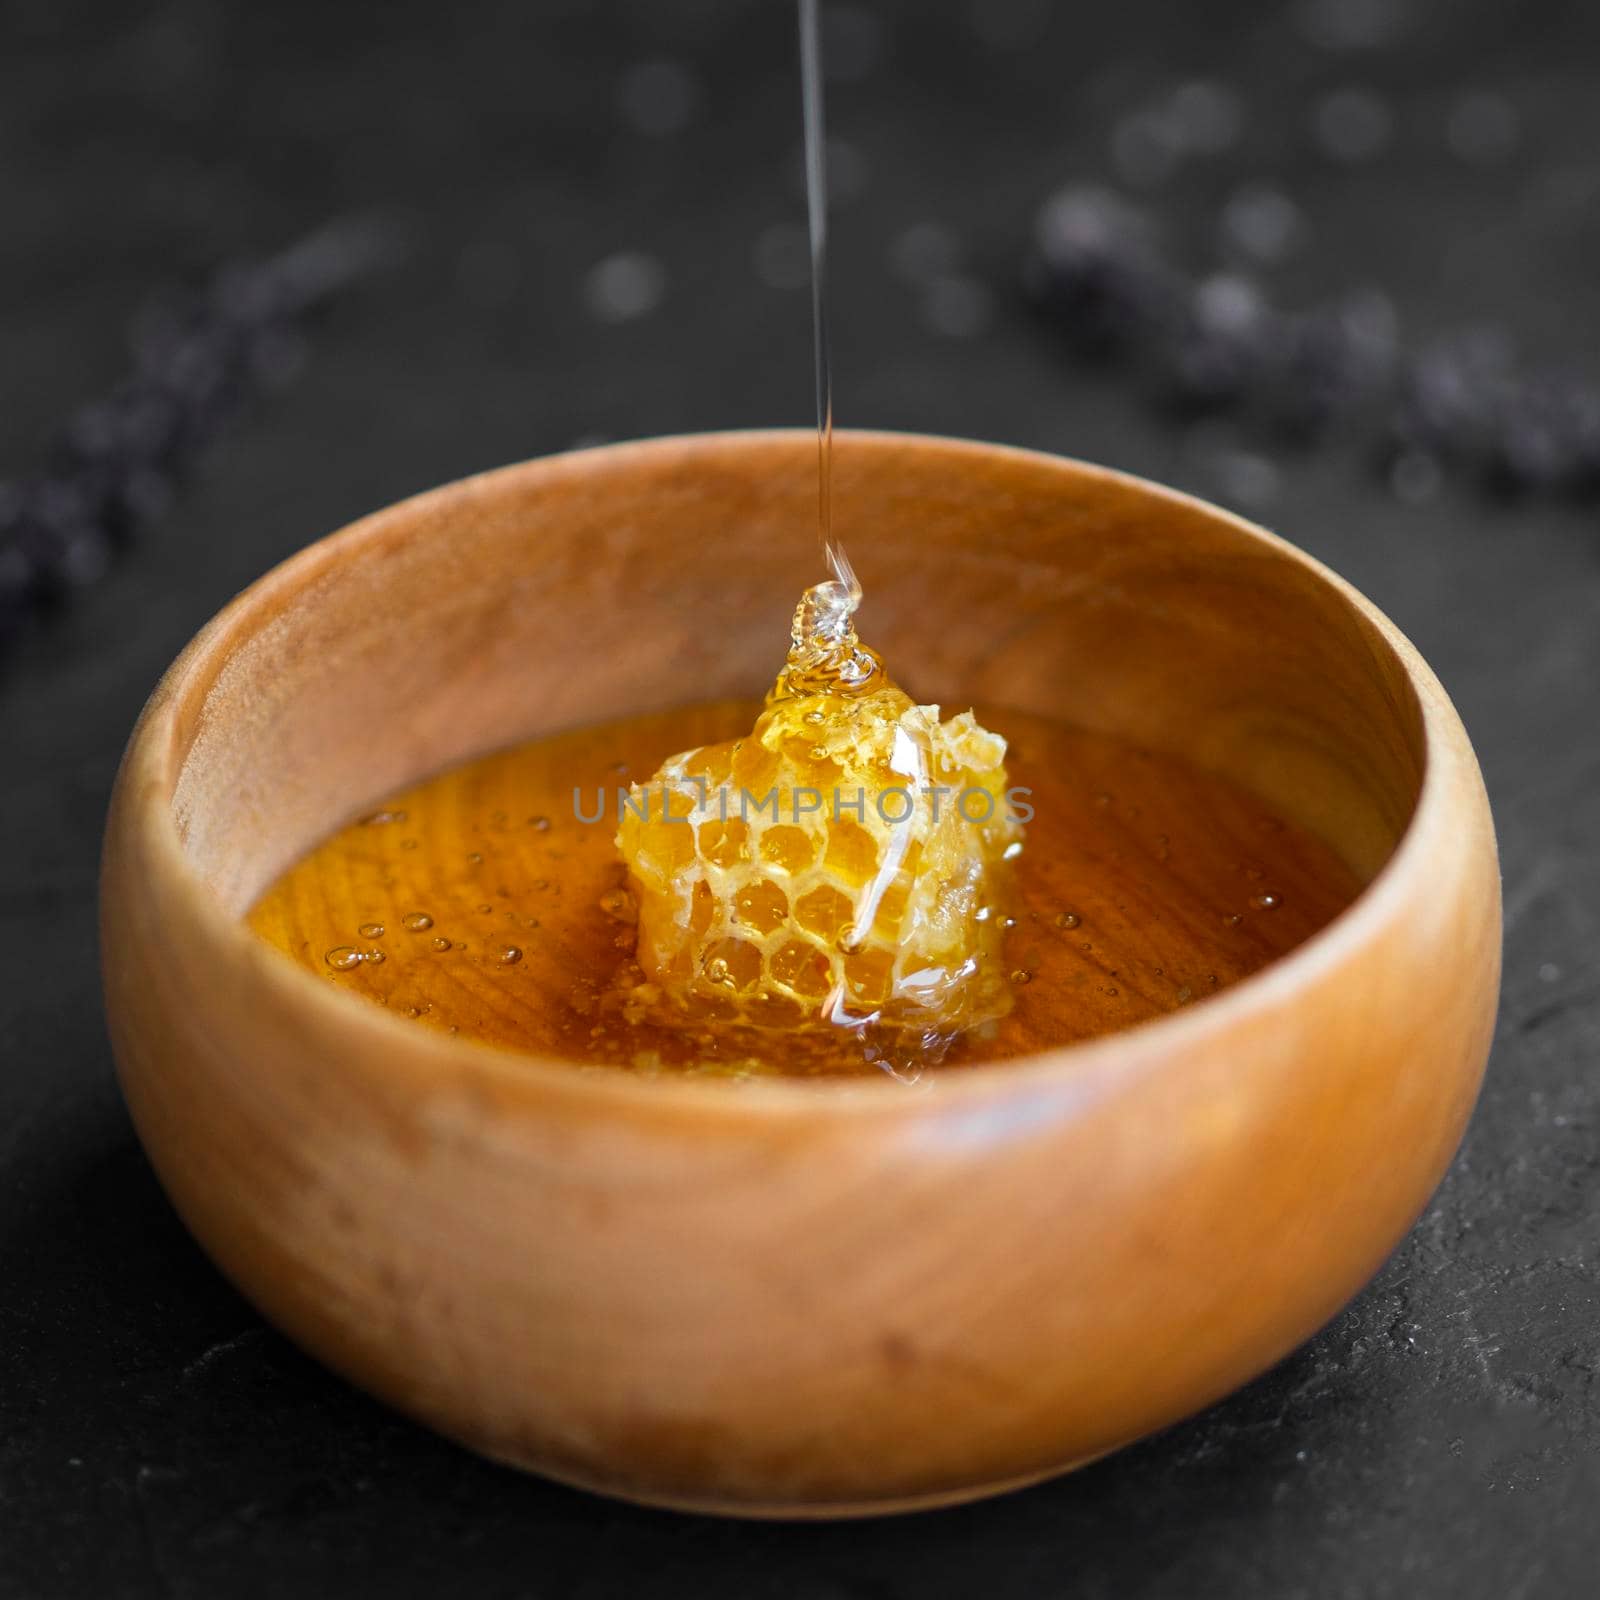 delicious honeycomb wooden bowl. High quality photo by Zahard